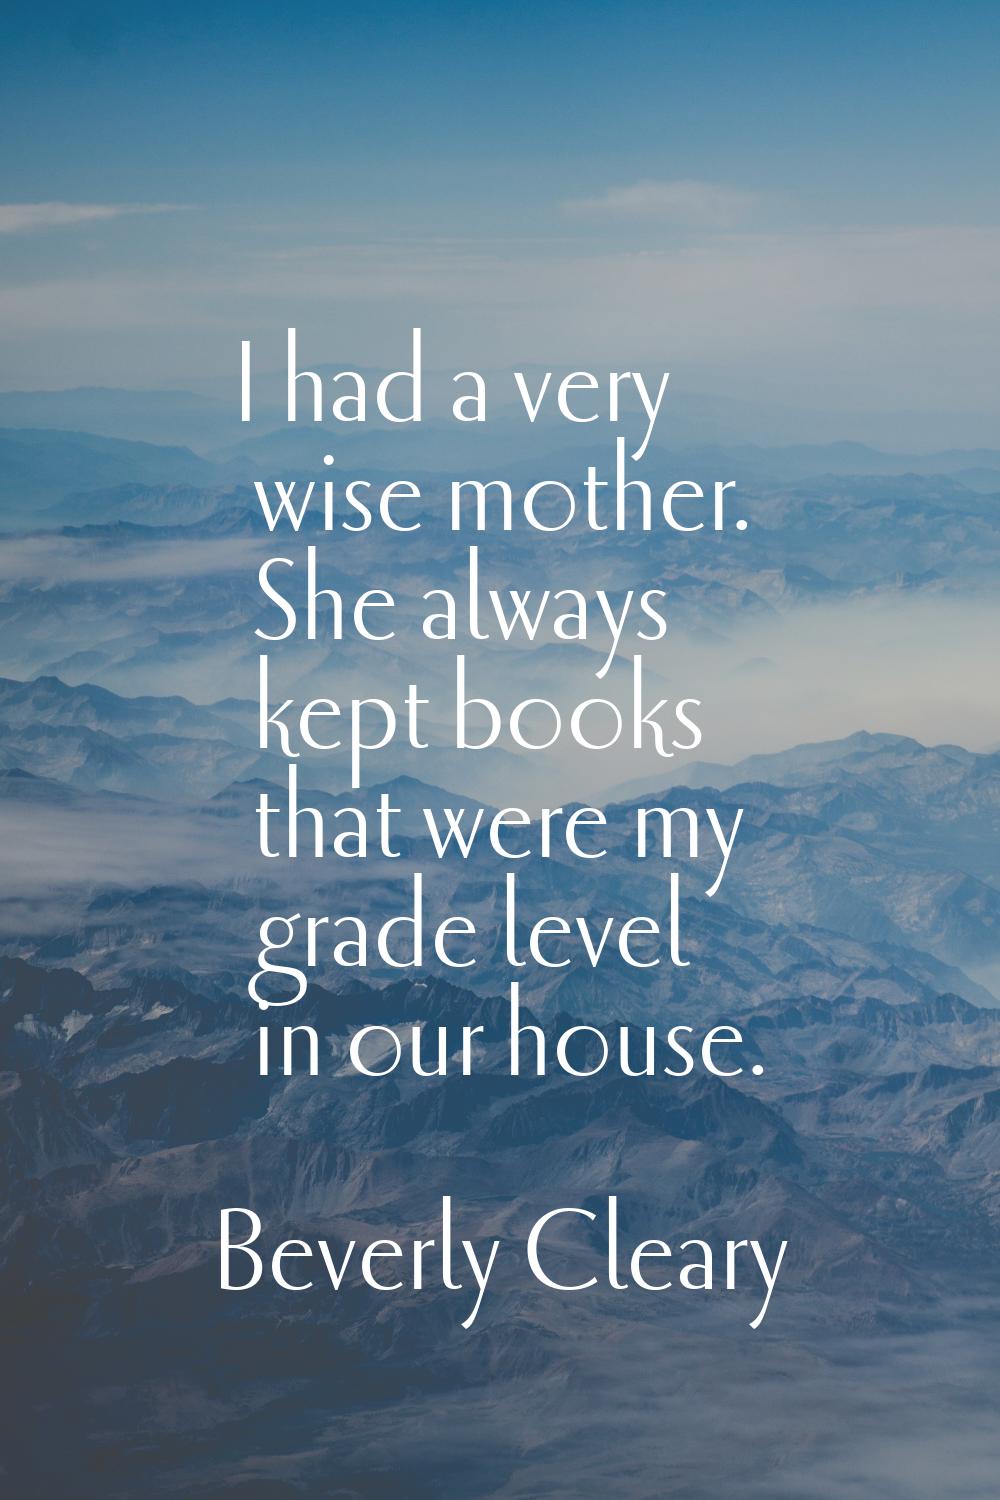 I had a very wise mother. She always kept books that were my grade level in our house.